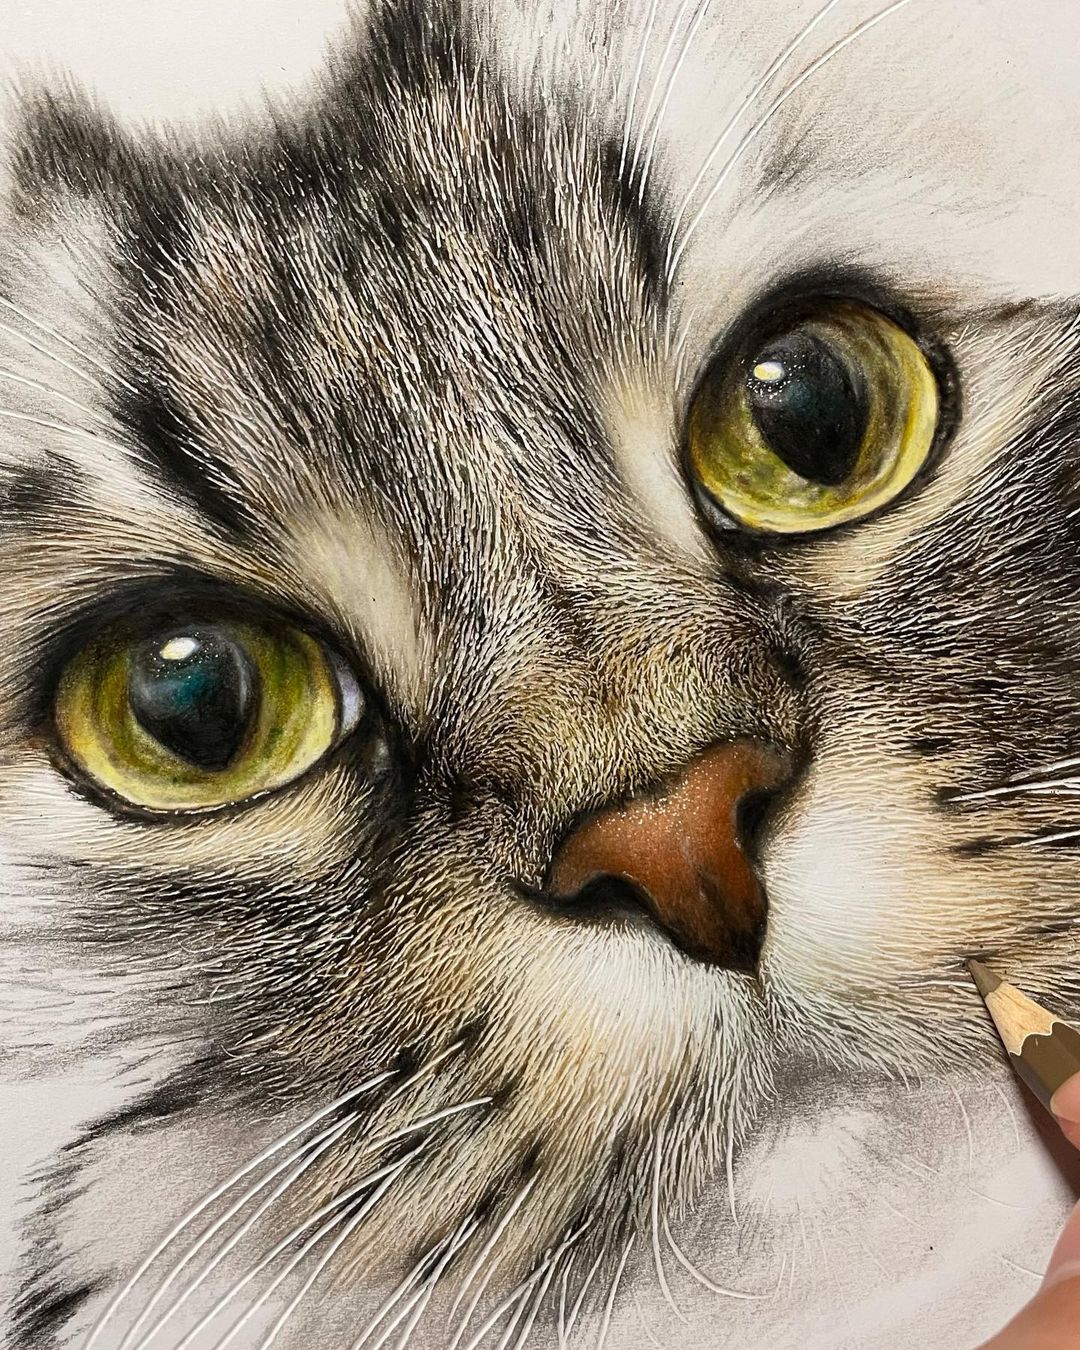 realistic cat drawing outline